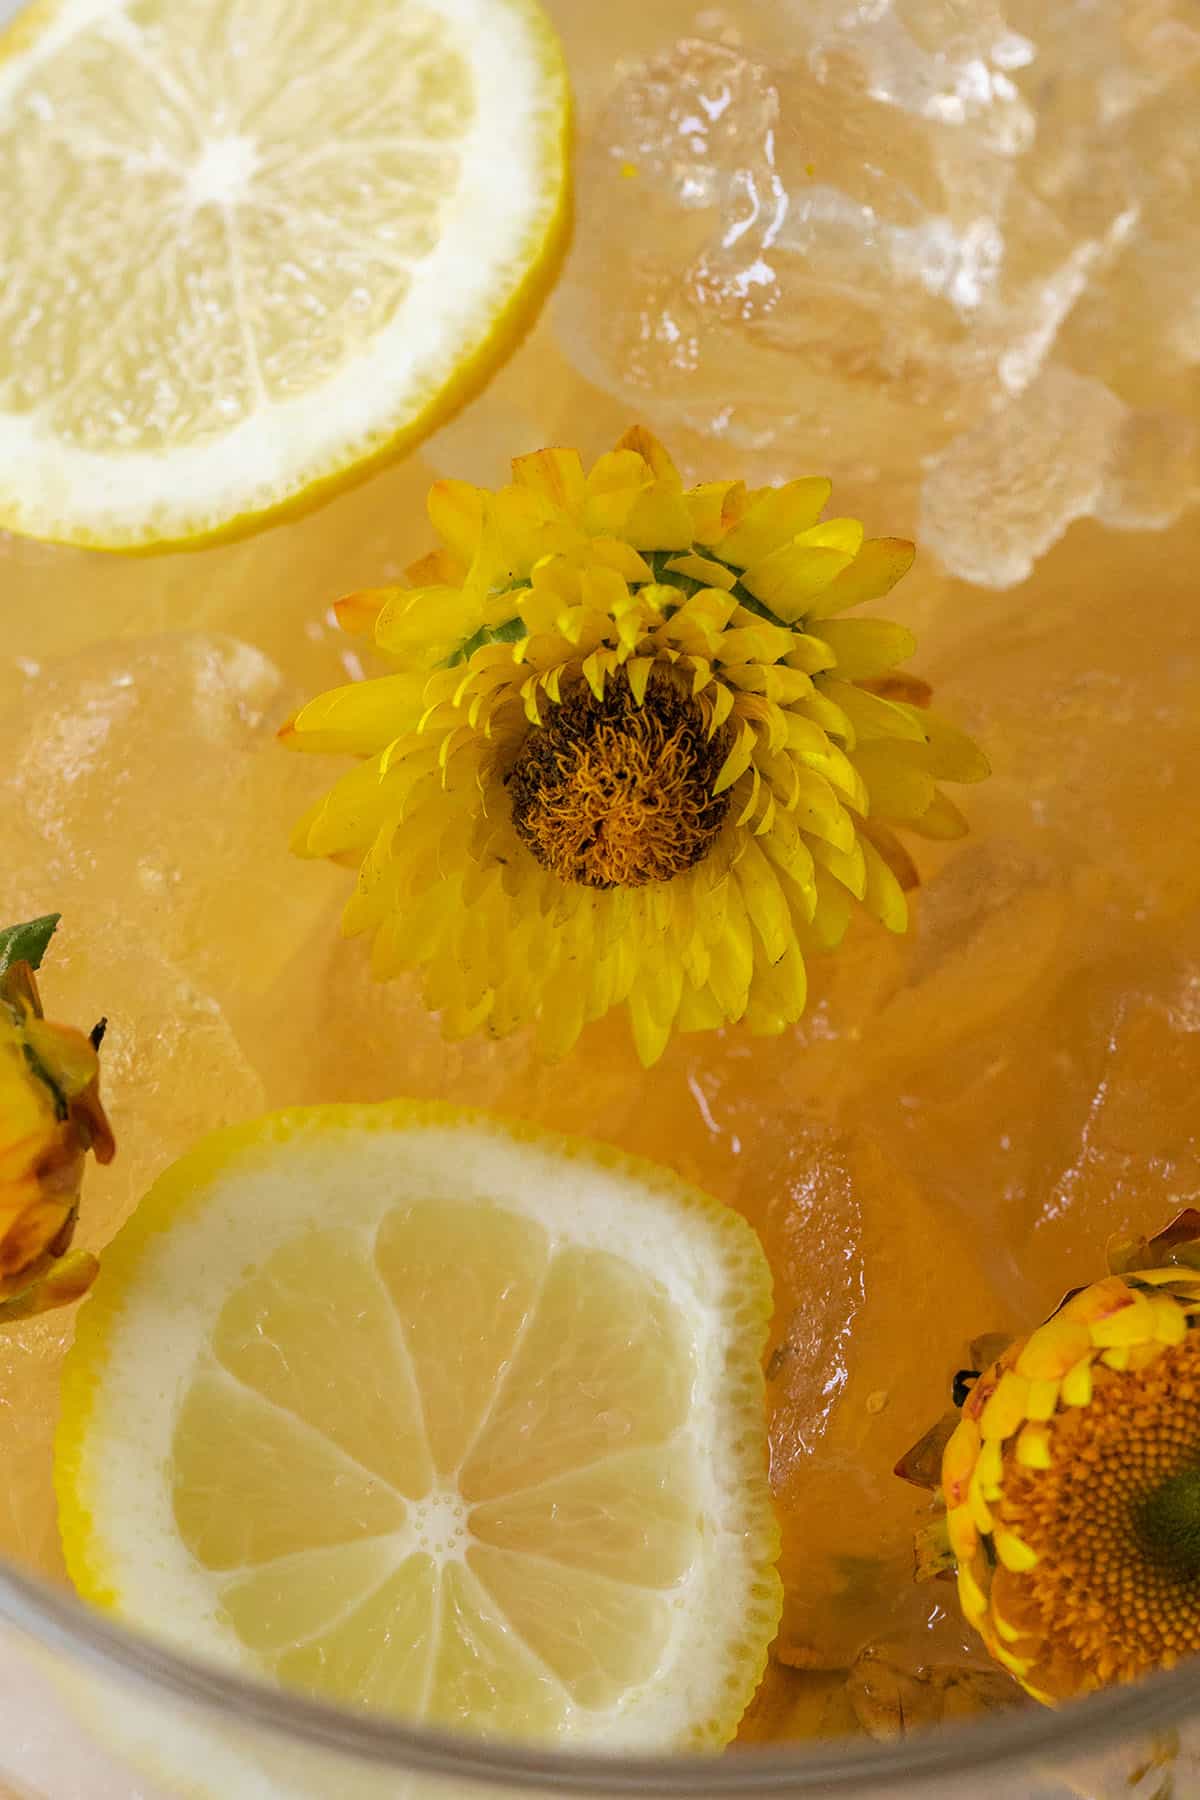 harvest punch with apple cider, lemon, whiskey and edible flowers